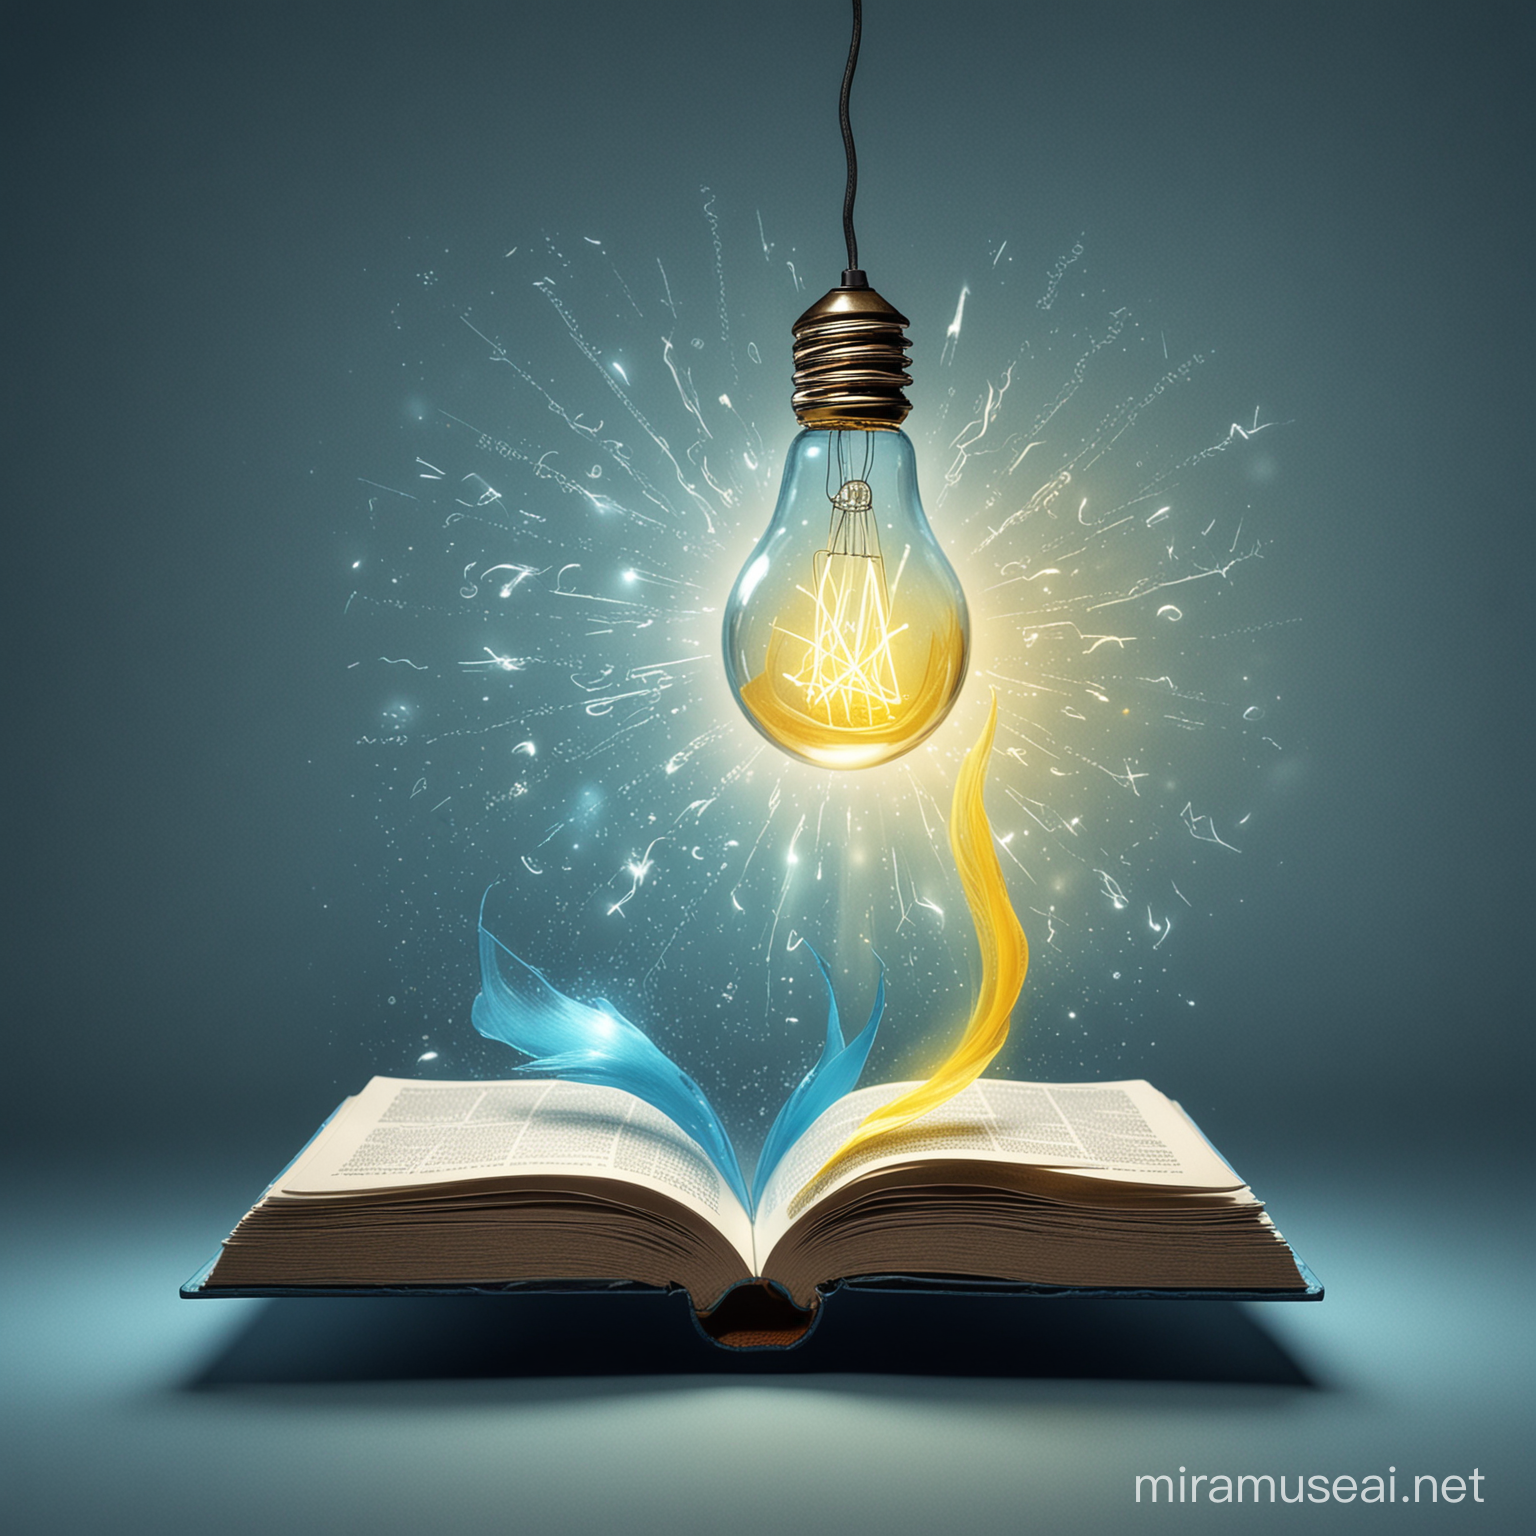 Inspiration from Open Pages Illuminating Knowledge and Creativity